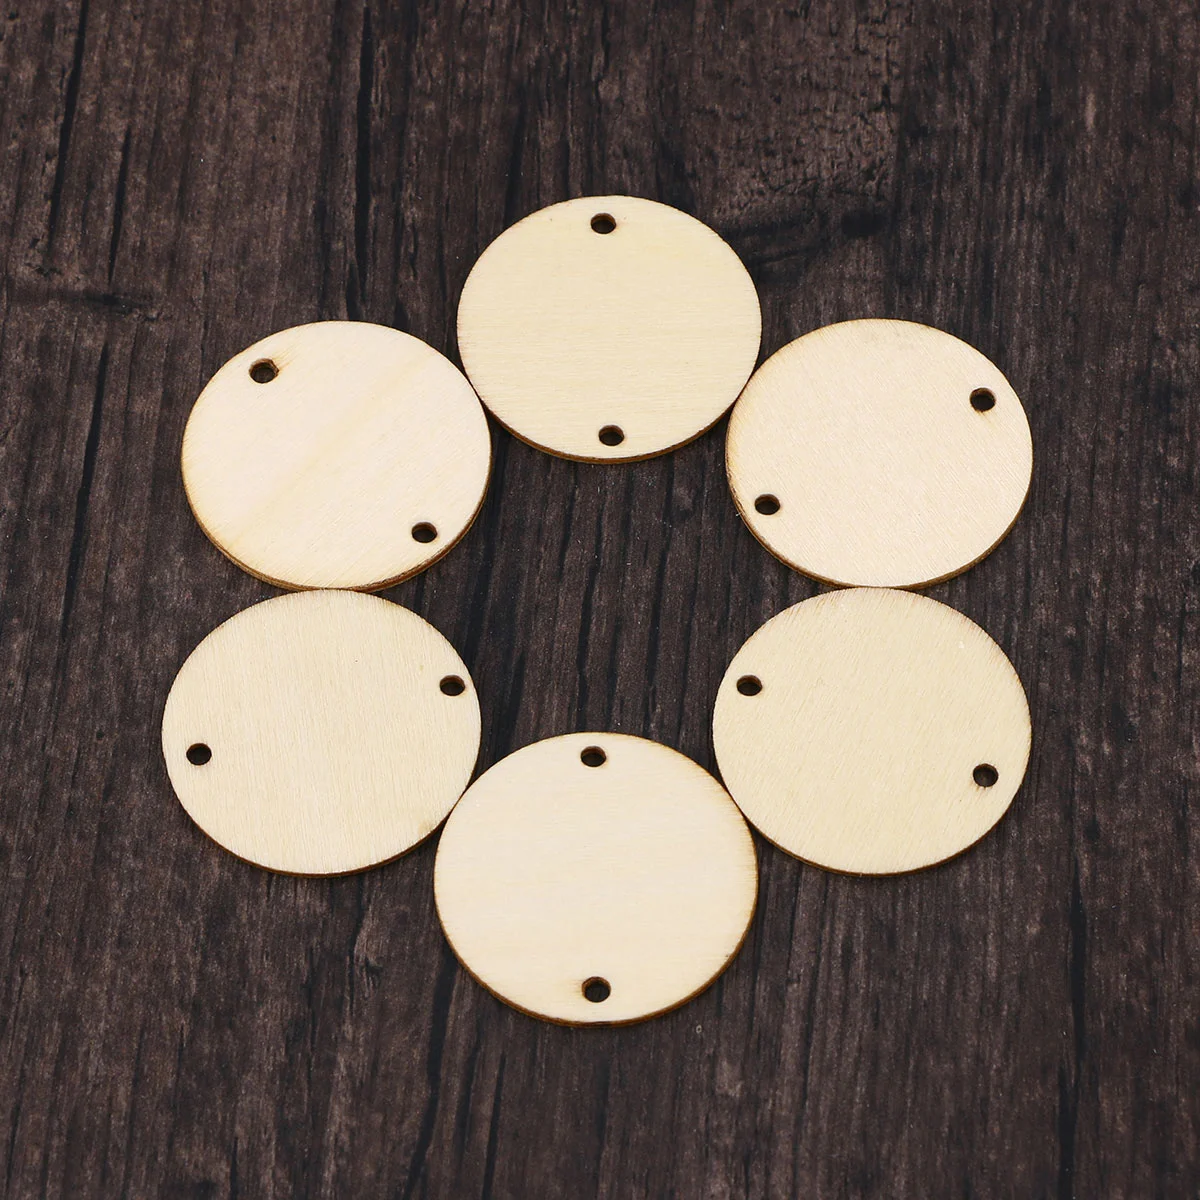 

Wooden Wood Slices Blank Circles Round Unfinished Disks Hole Tags Chip Diy Carving Engraving Pieces Painting Slice Rounds Circle